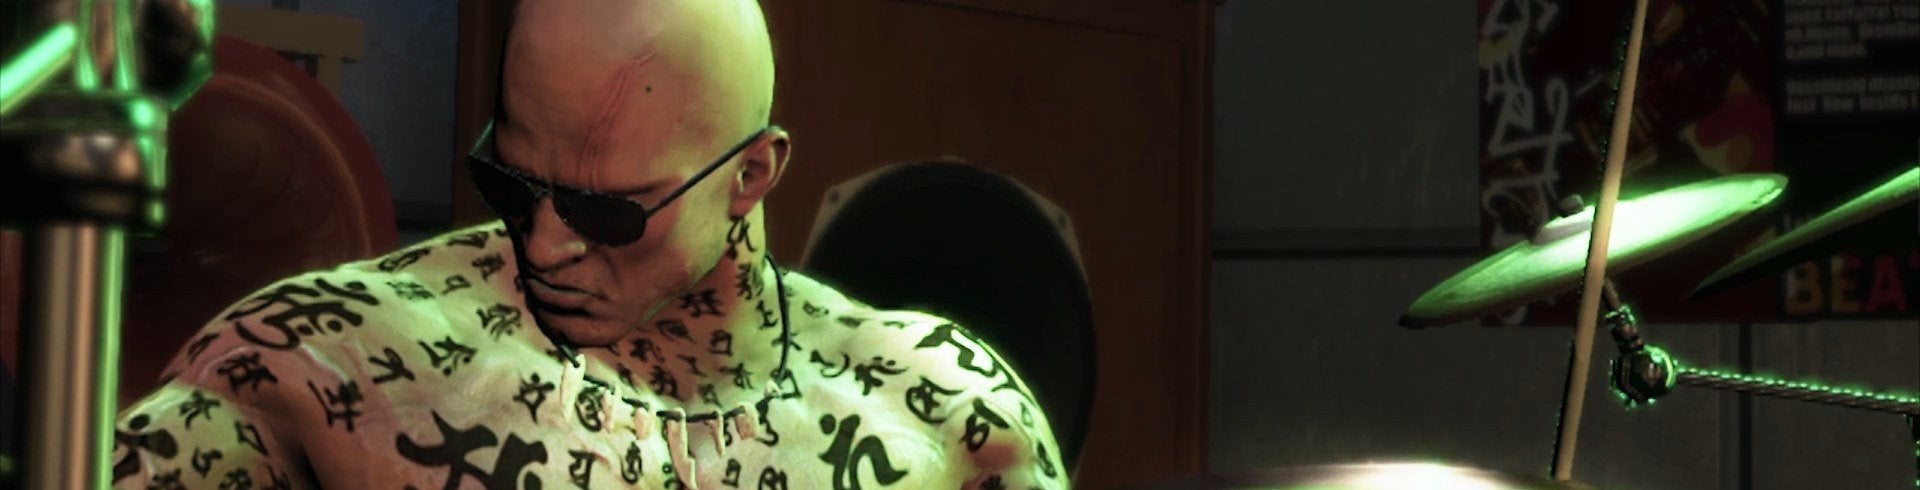 Image for Devil's Third is a shoddy game - but can it be so bad it's good?